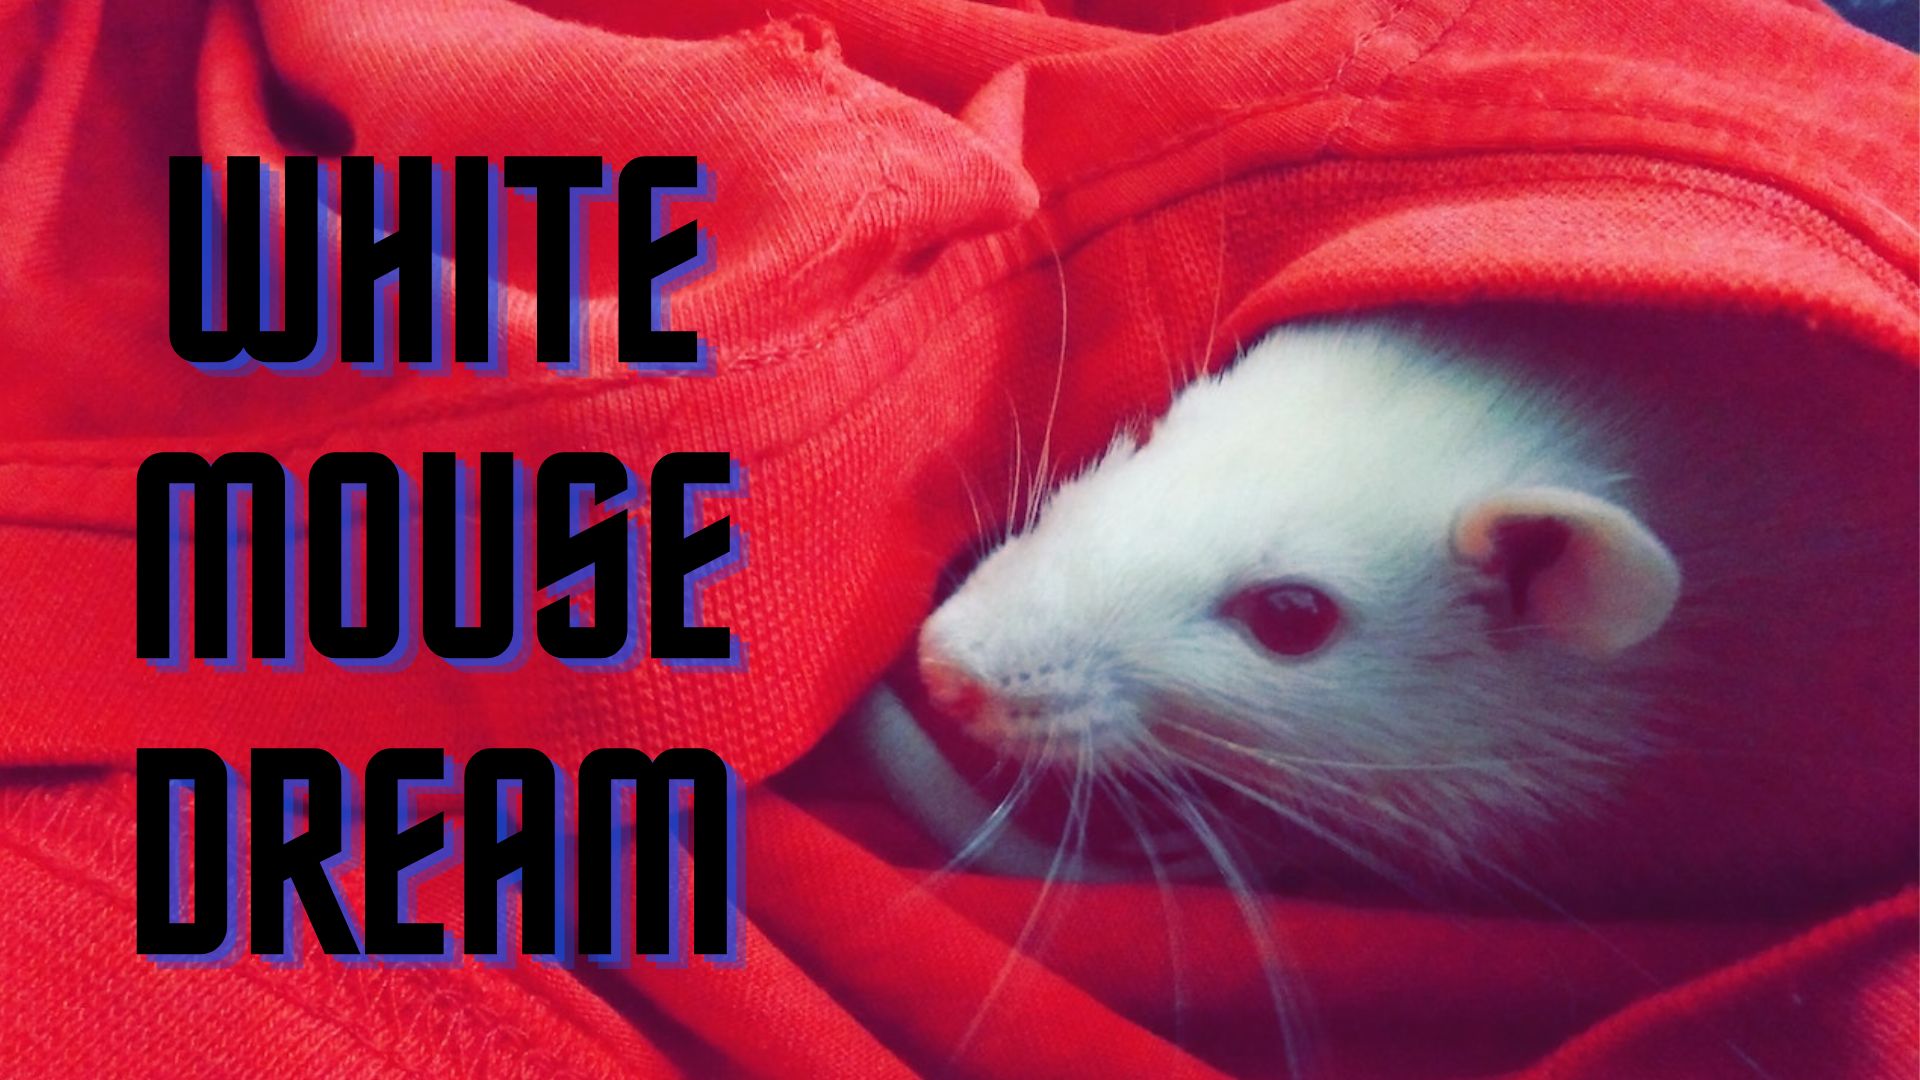 White Mouse Dream - A Warning About Hypocrisy